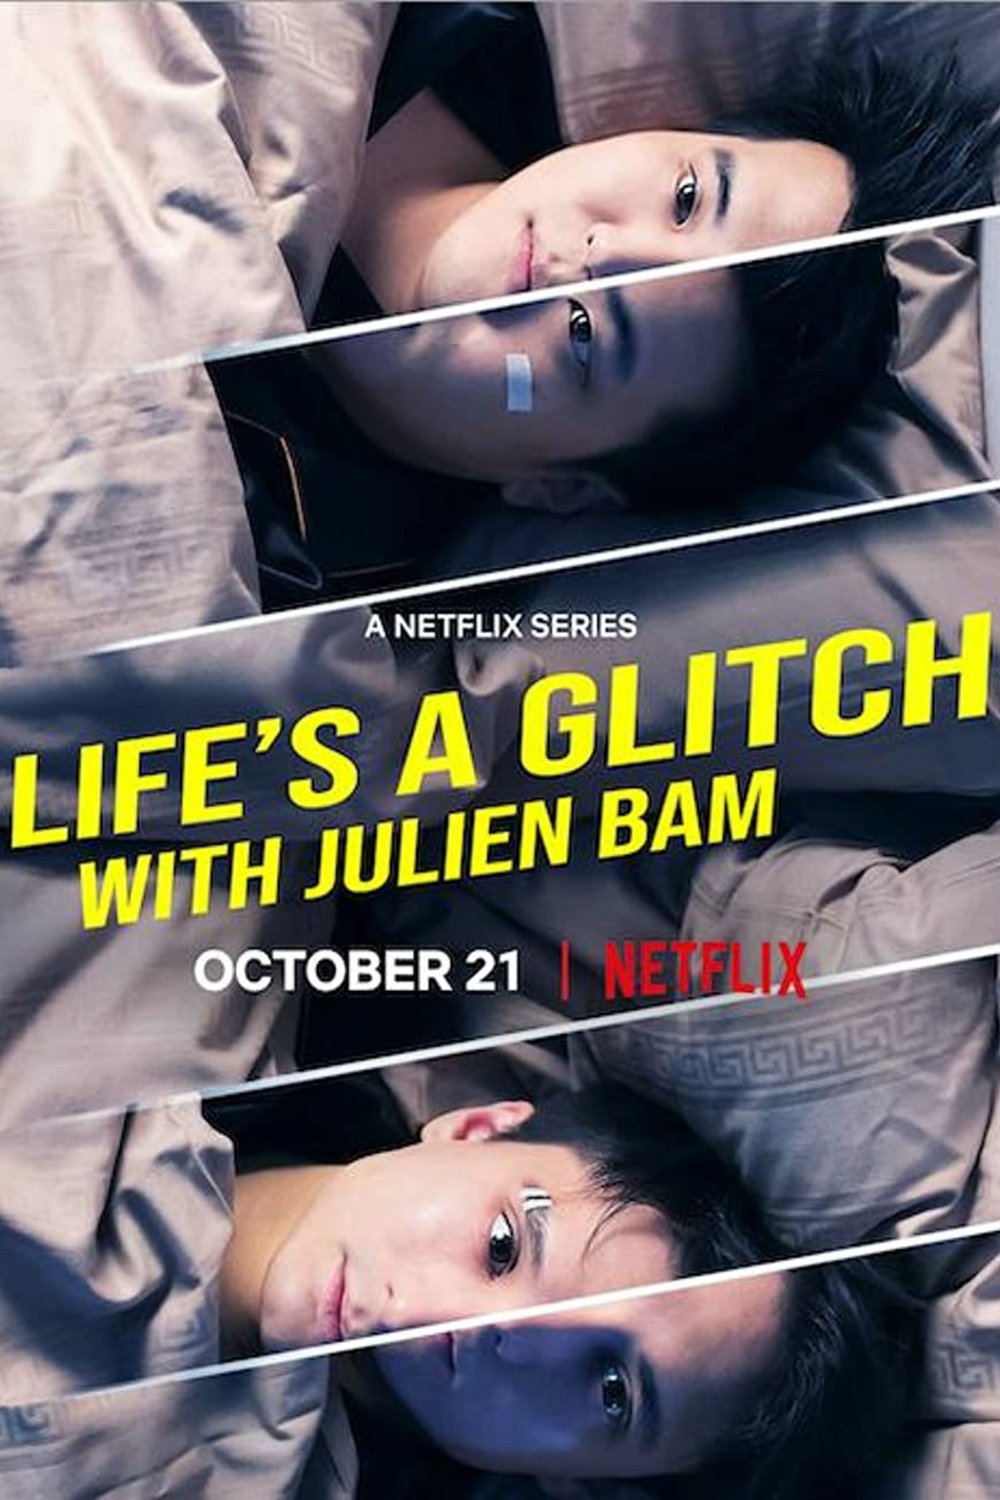 Poster of the movie Life's a Glitch with Julien Bam